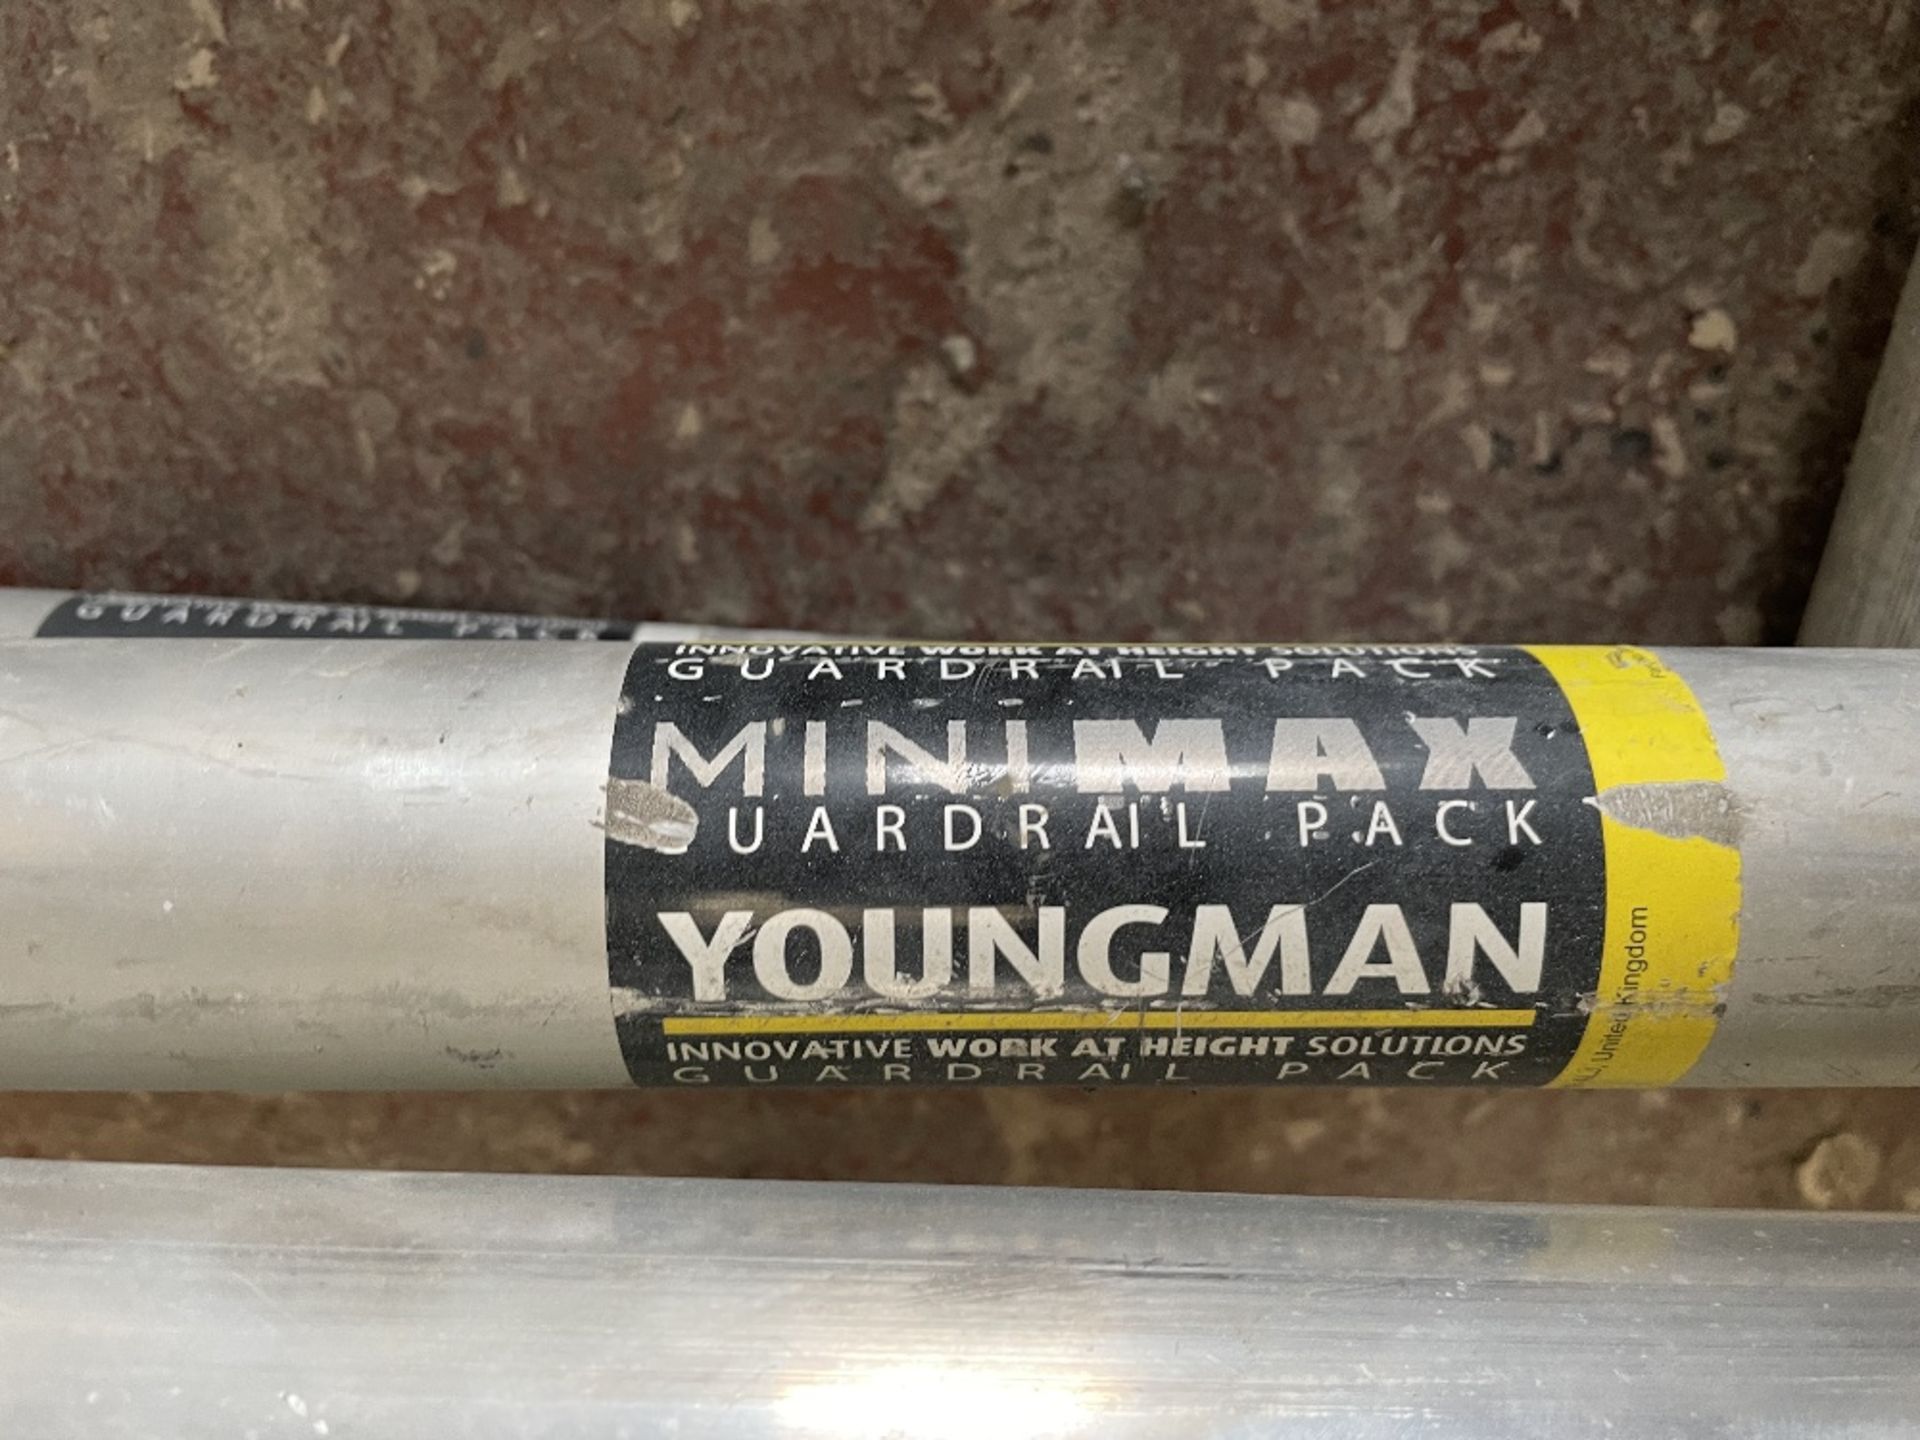 Youngman 370518 Minimax Scaffold Tower - Image 7 of 9